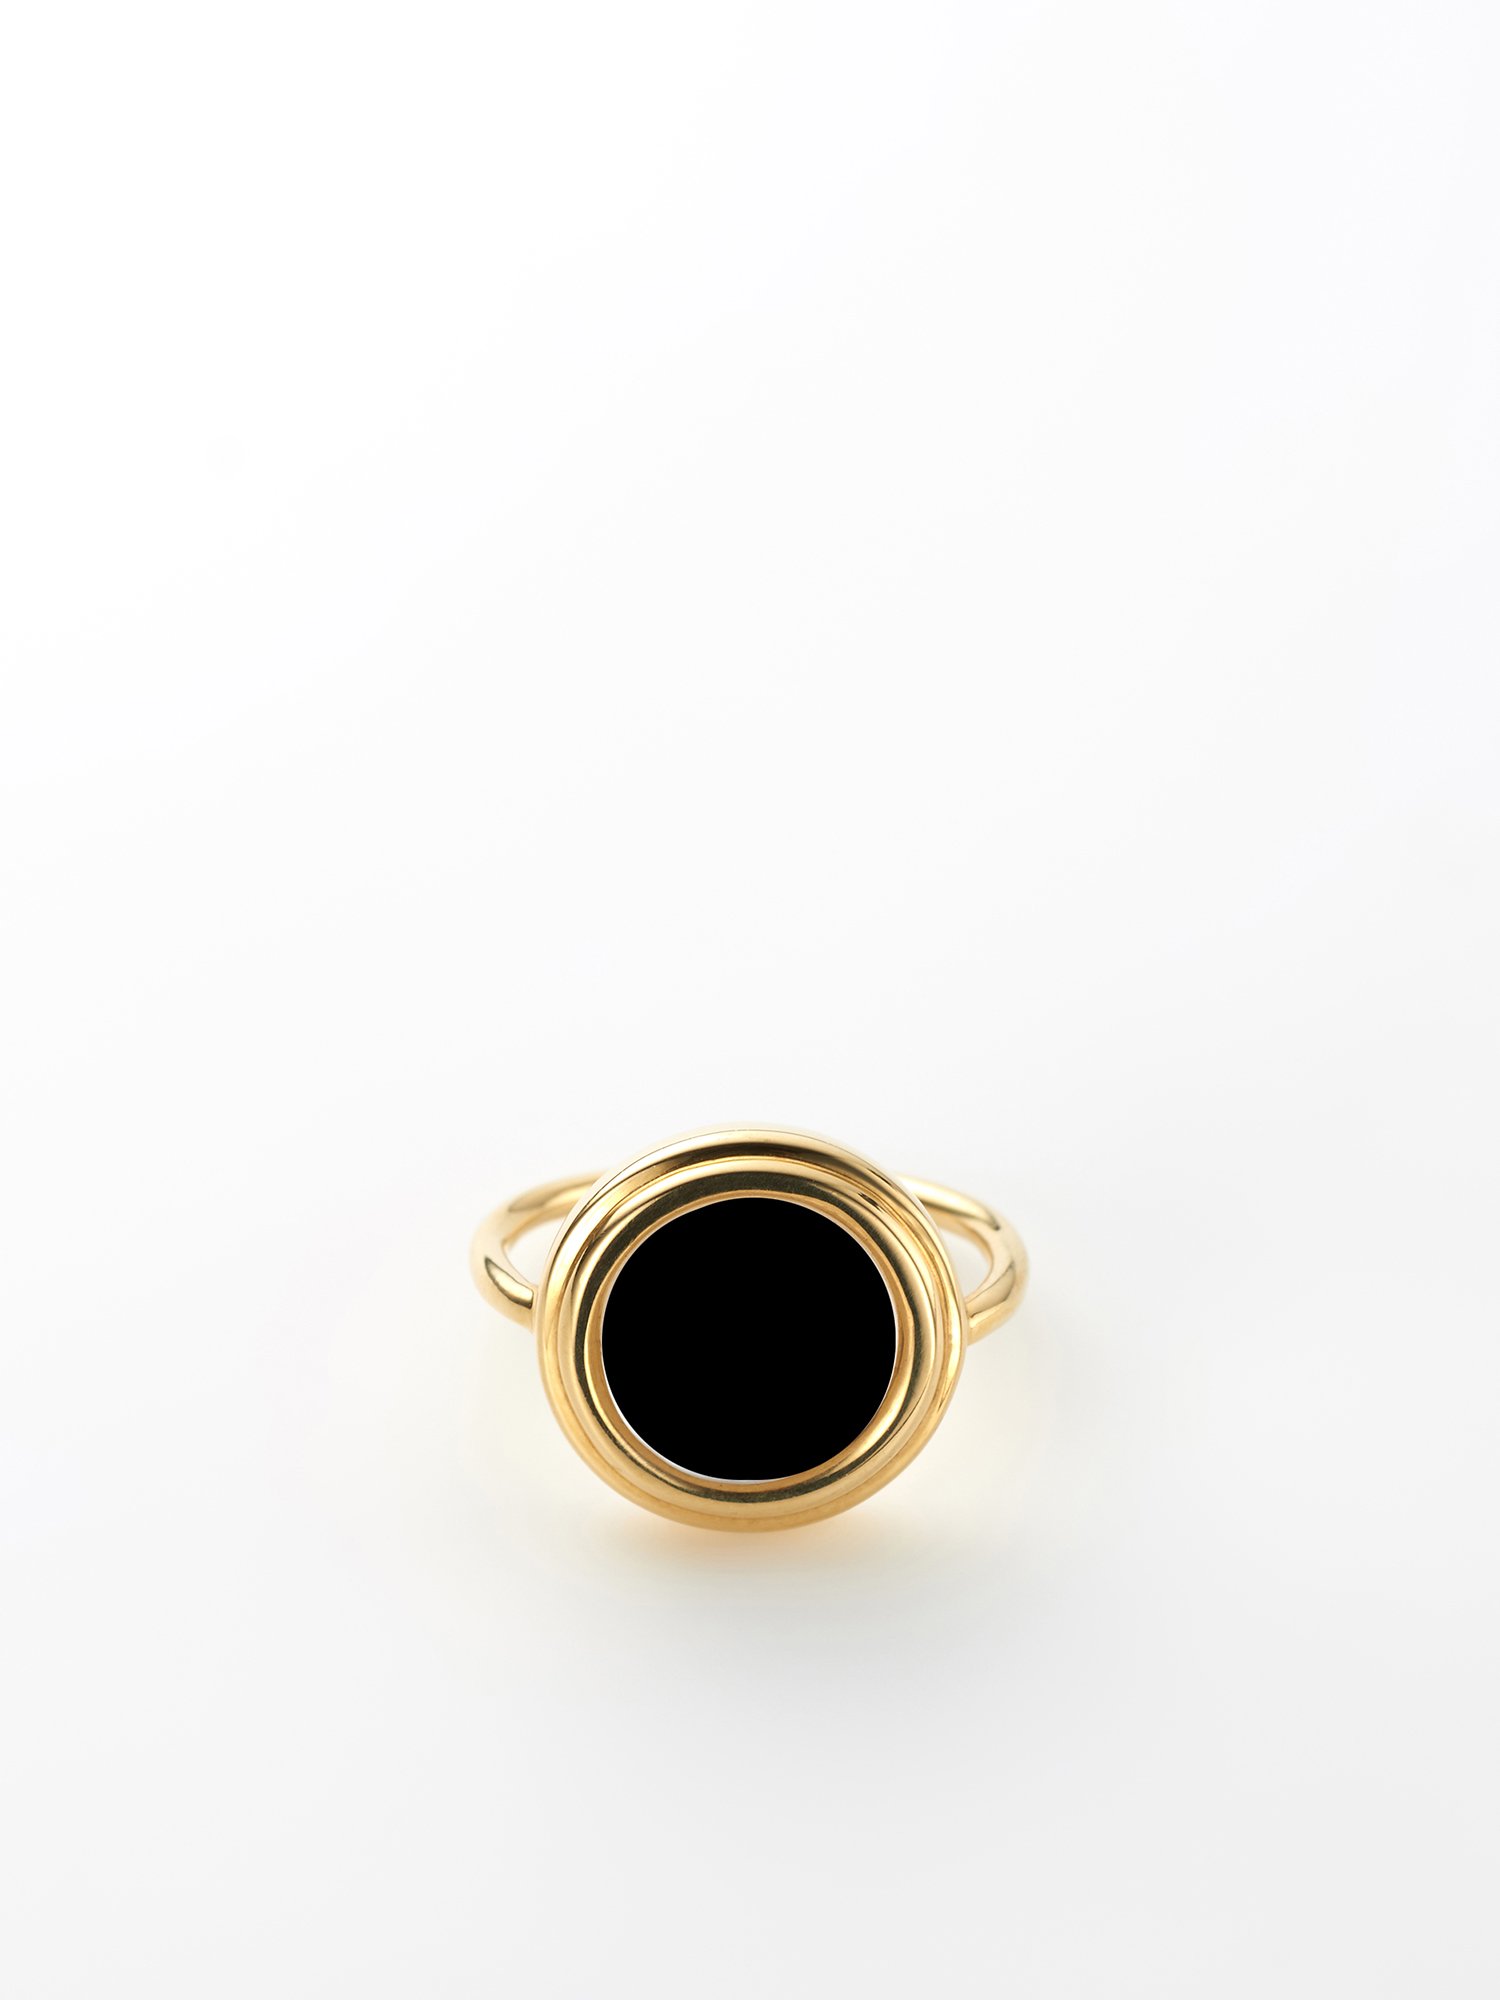  SOPHISTICATED VINTAGE / Planet ring / Onyx